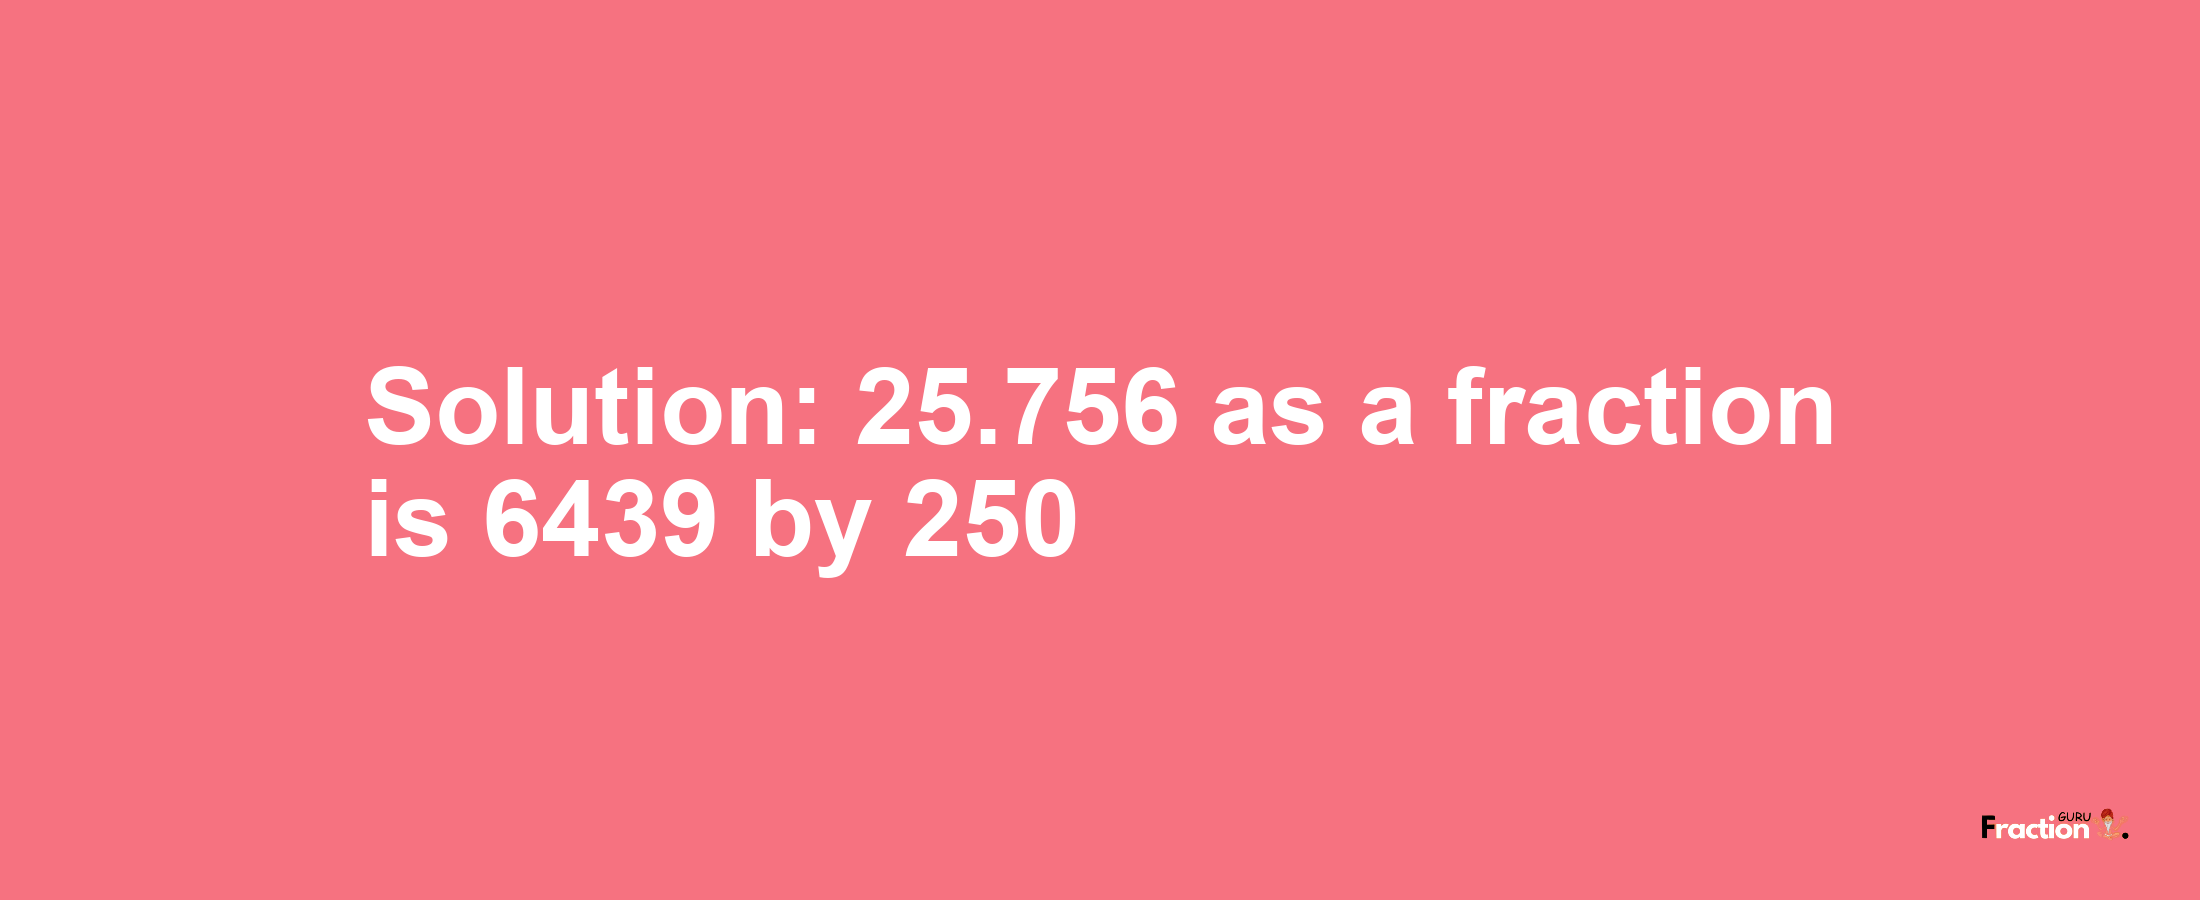 Solution:25.756 as a fraction is 6439/250